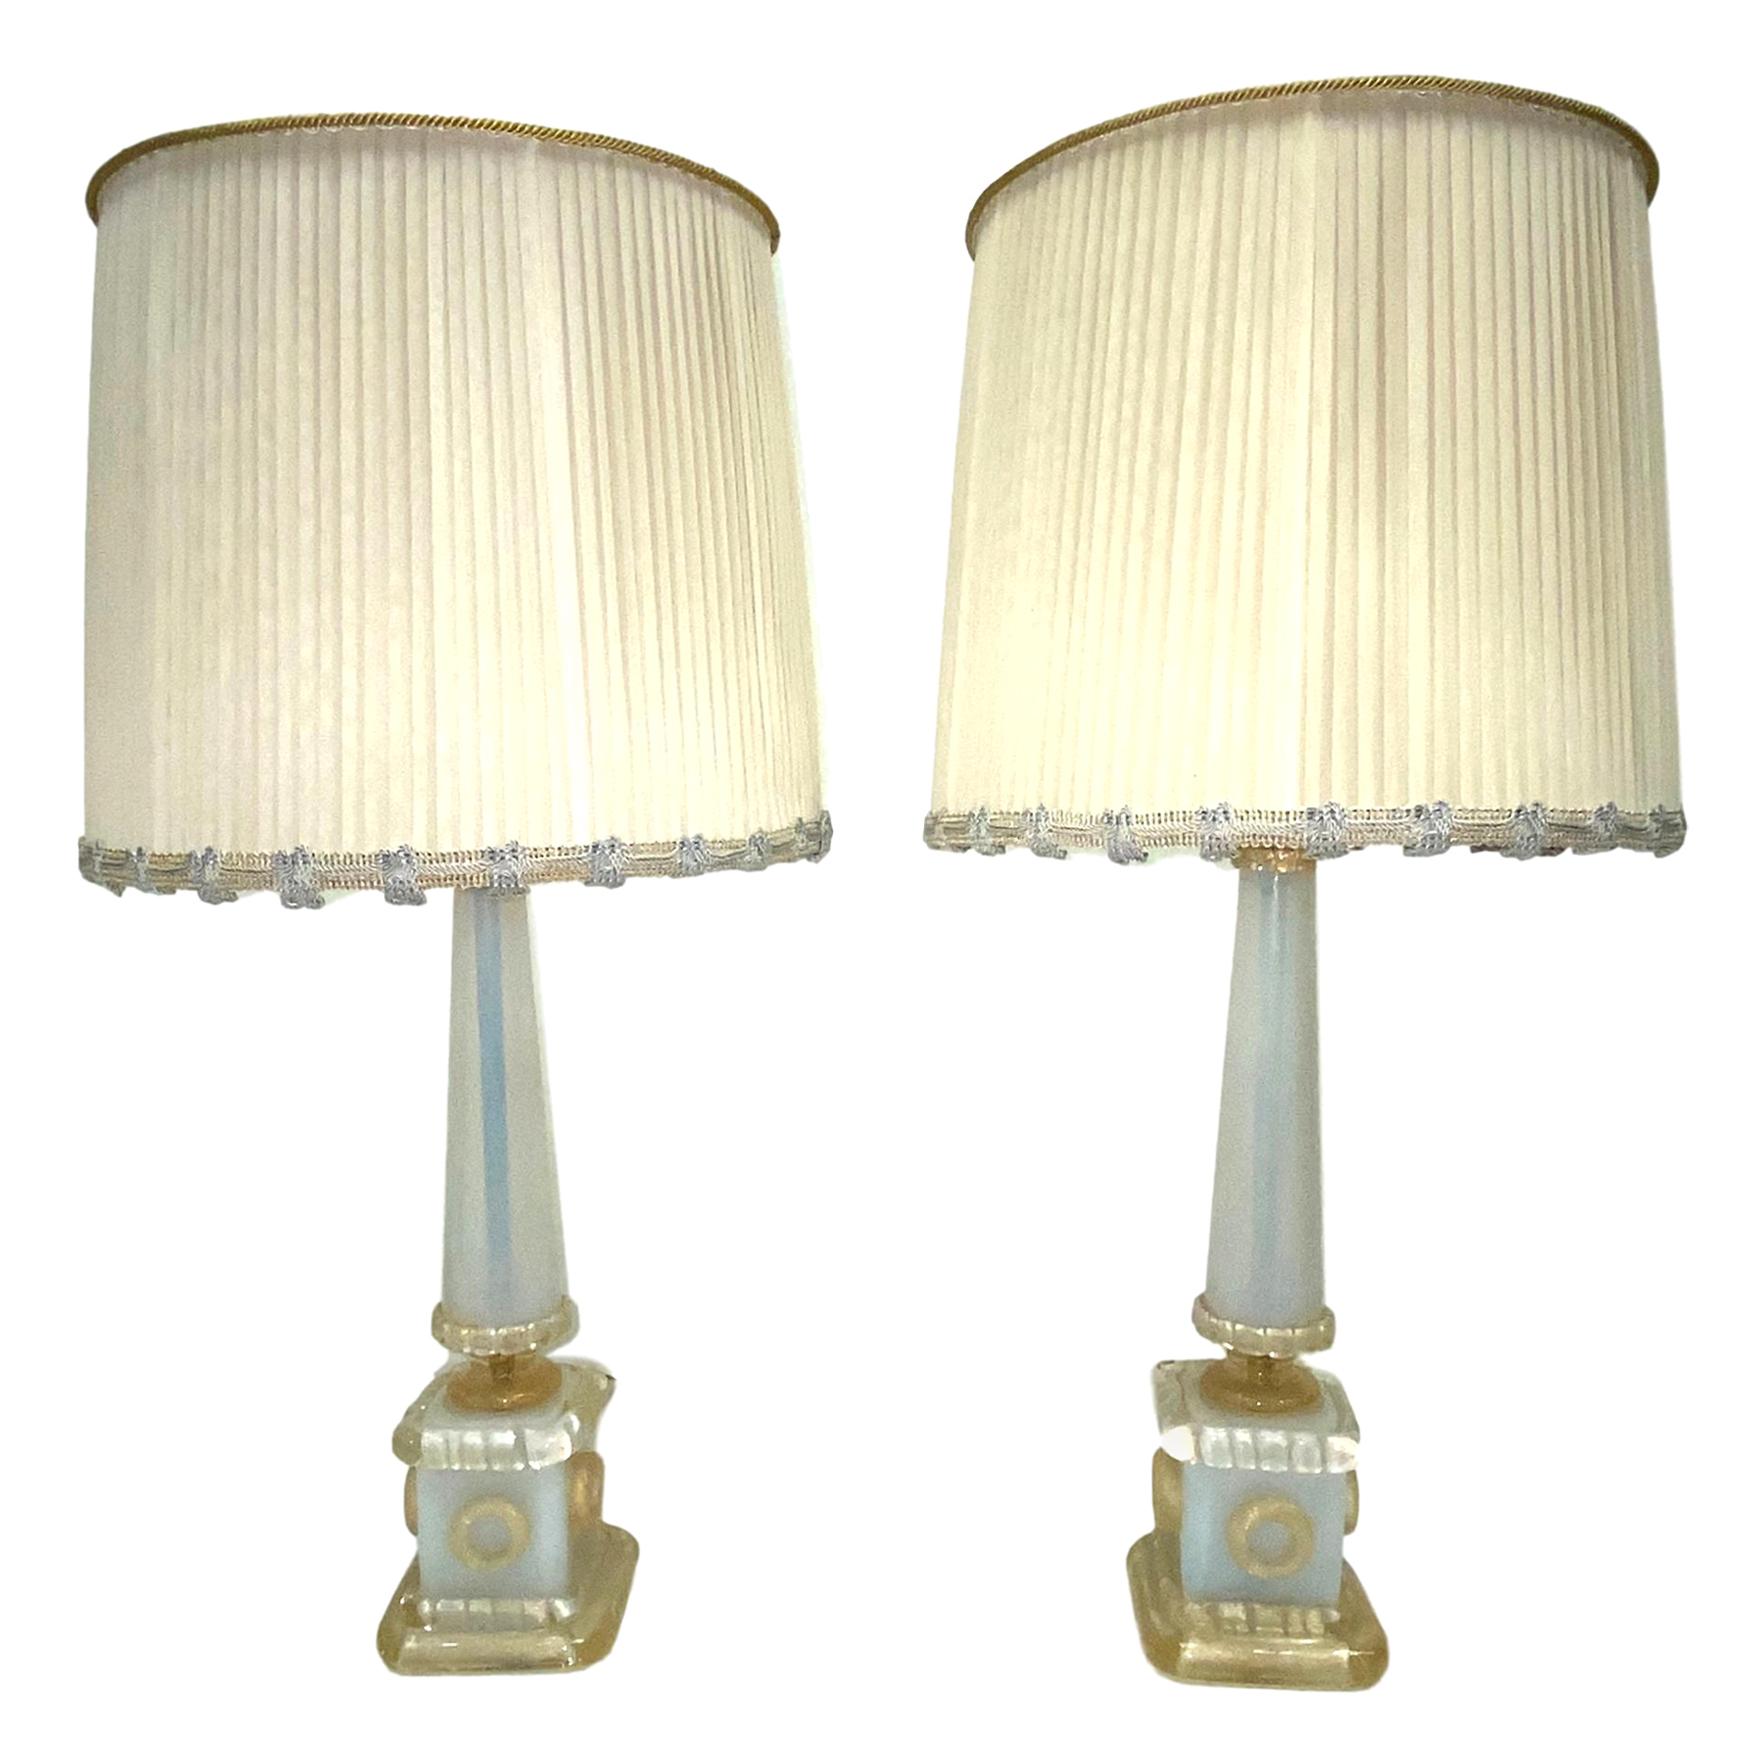 Barovier Toso Neoclassic Obelisk Iridize & Gold Infused Murano Glass Table Lamps